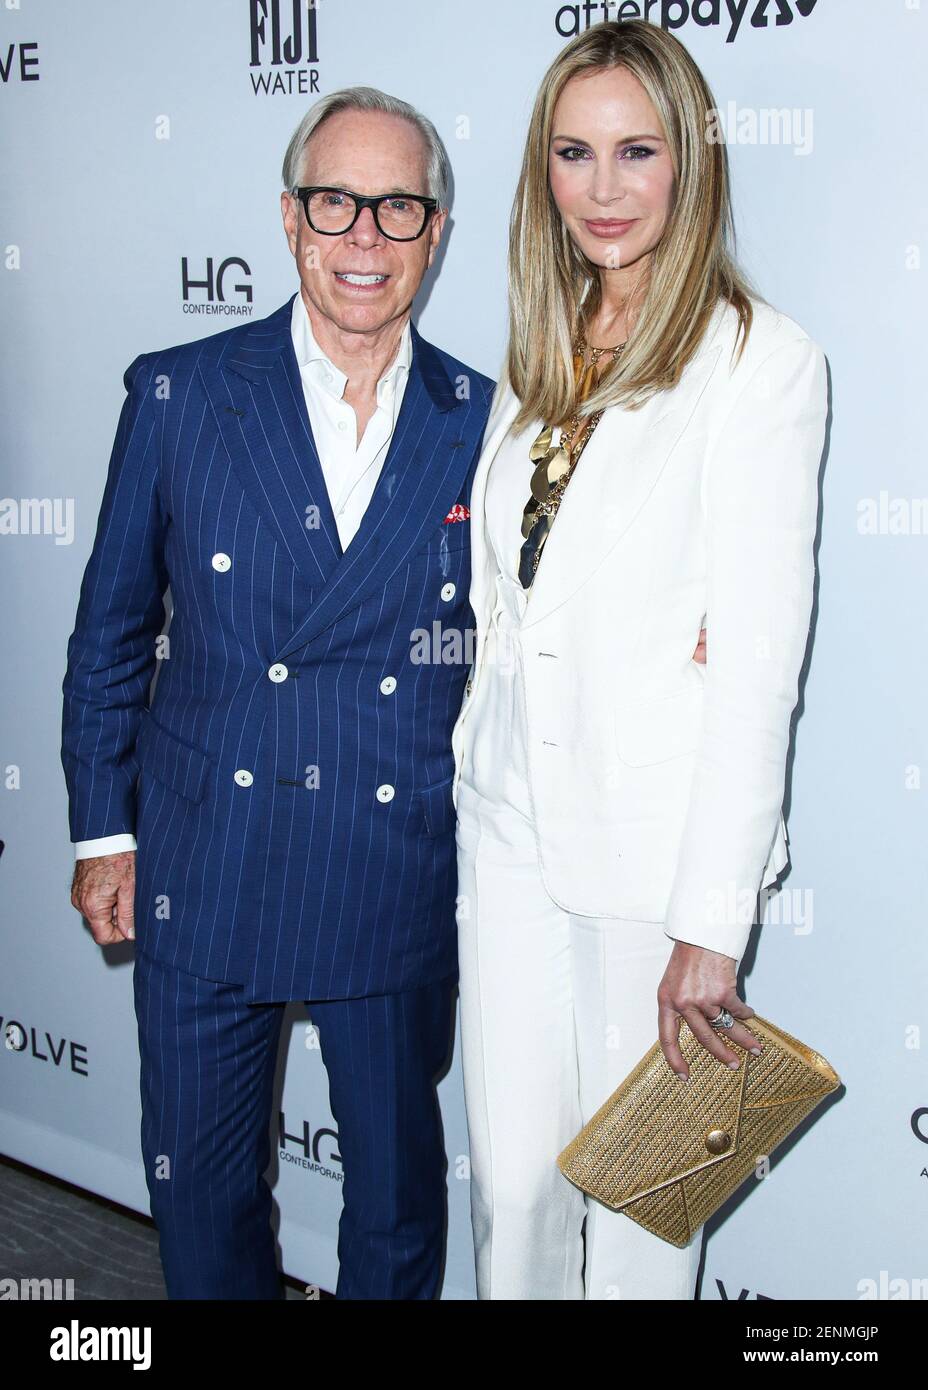 MANHATTAN, NEW YORK CITY, NEW YORK, USA - SEPTEMBER 05: Tommy Hilfiger and  Dee Ocleppo arrive at Daily Front Row's 2019 Fashion Media Awards held at  The Rainbow Room at the Rockefeller